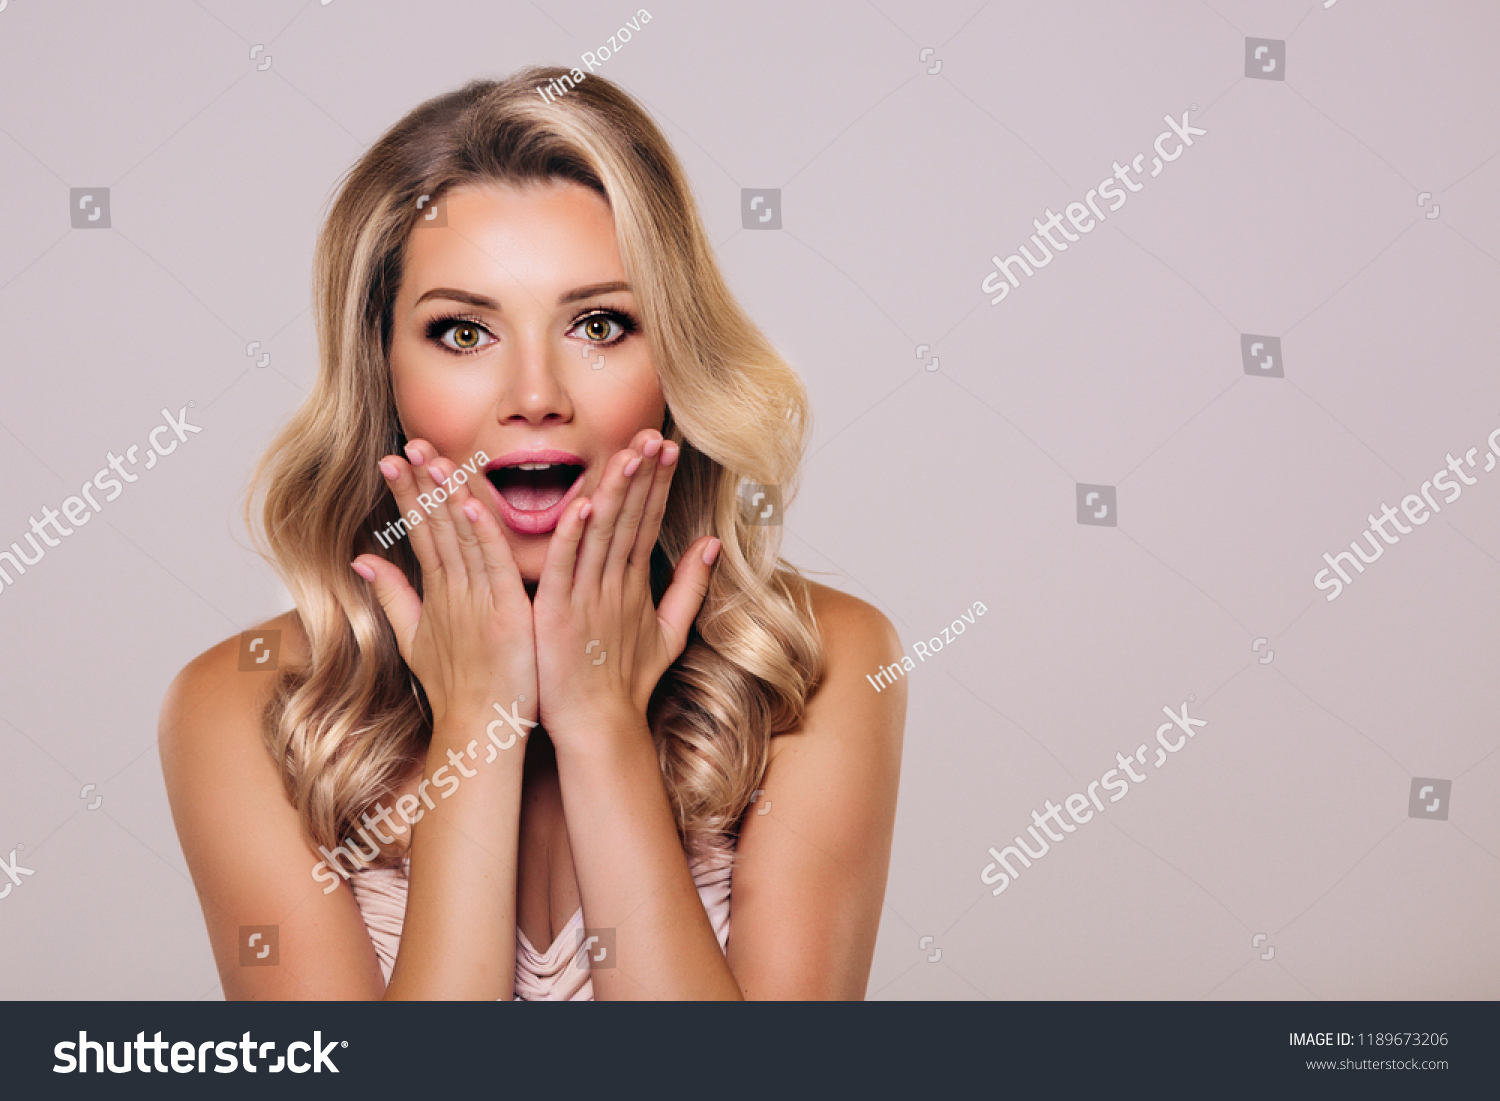 Surprised beautyful woman with opened mouth and blond hair. Woman in shock. Surprising facial emotions #1189673206